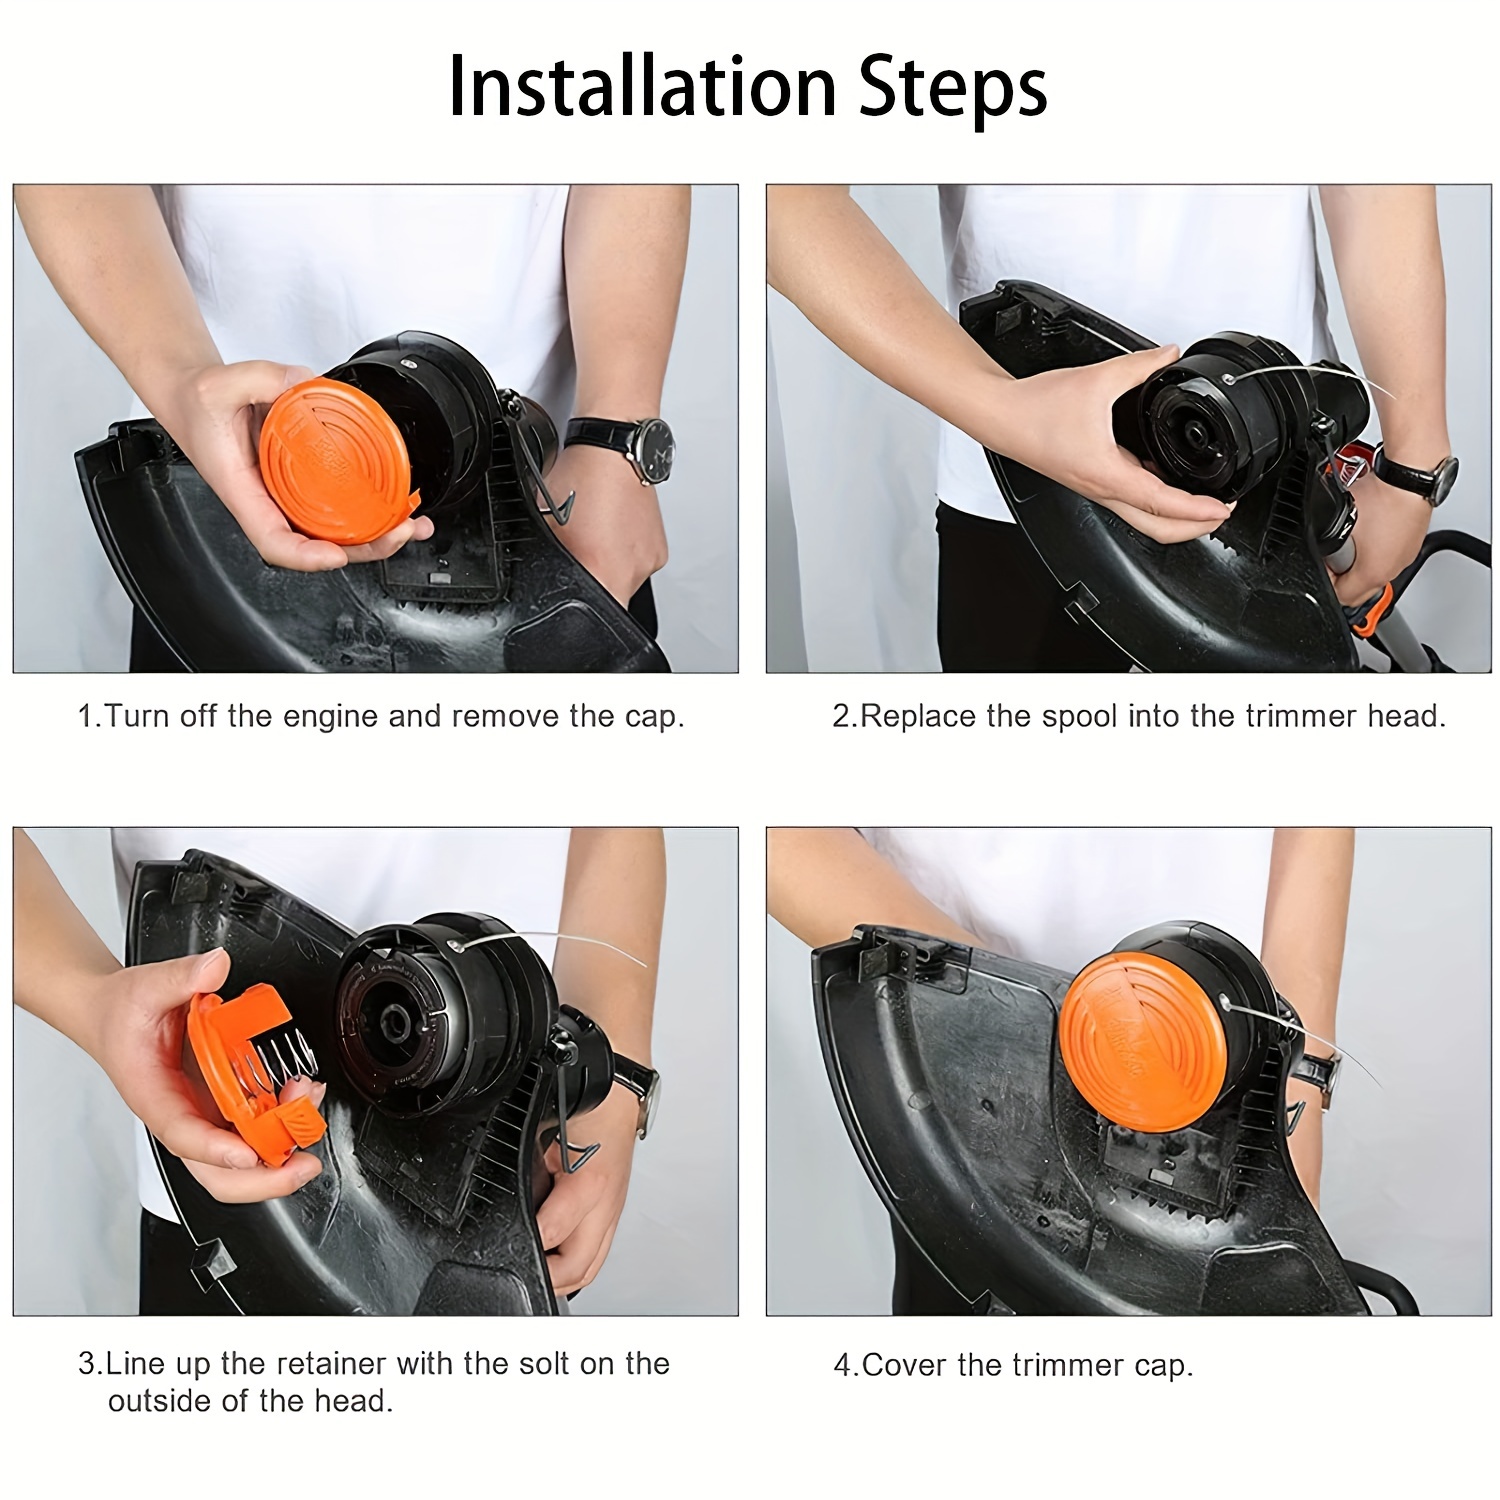 How to Replace the Line on a Black and Decker Trimmer: 12 Steps